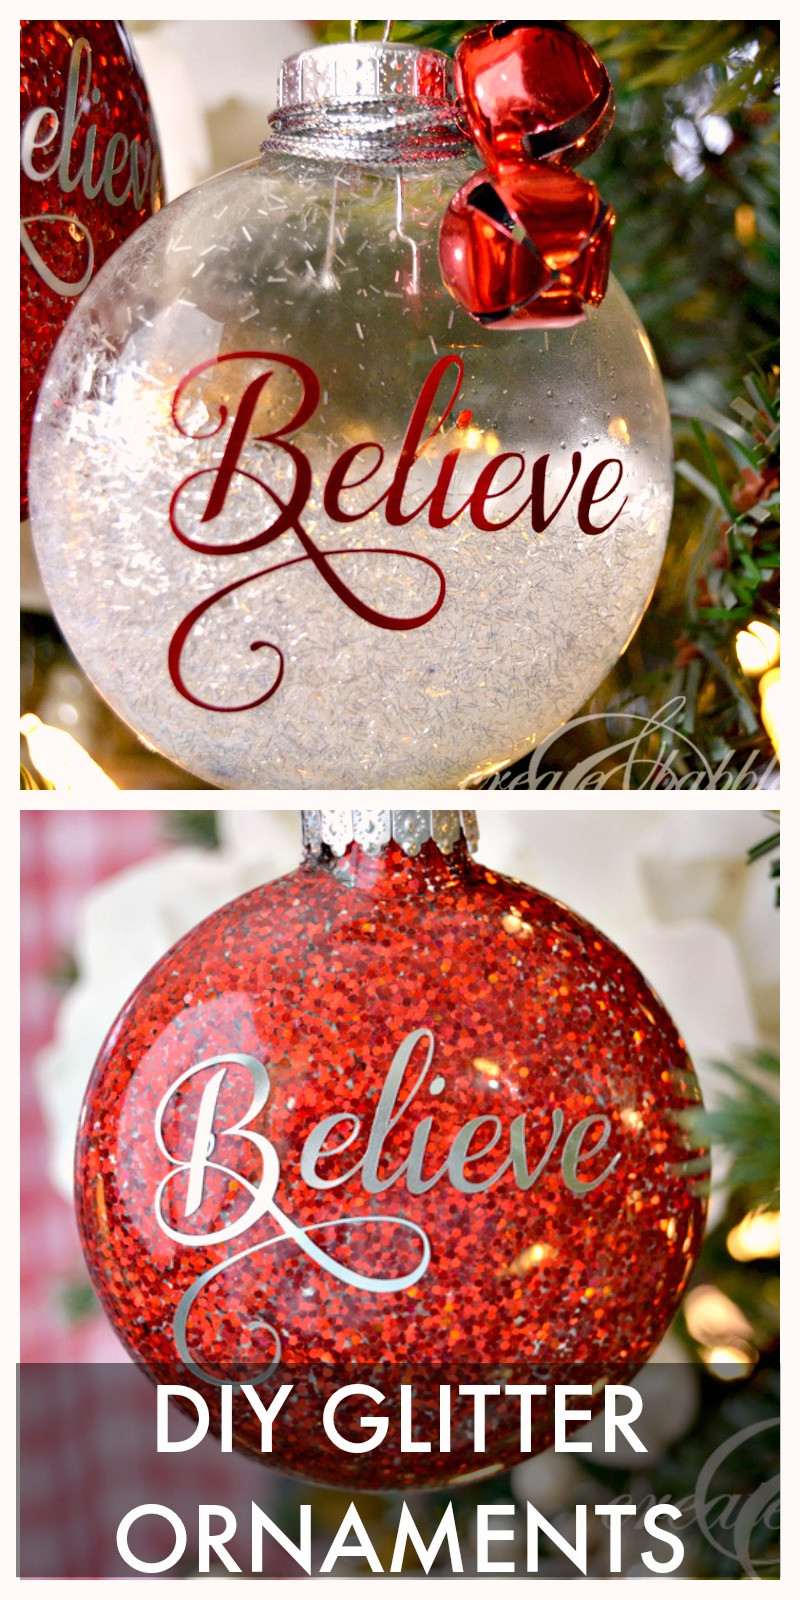 DIY Christmas Ornaments With Pictures
 30 Christmas Tree Ornaments to Make TGIF This Grandma